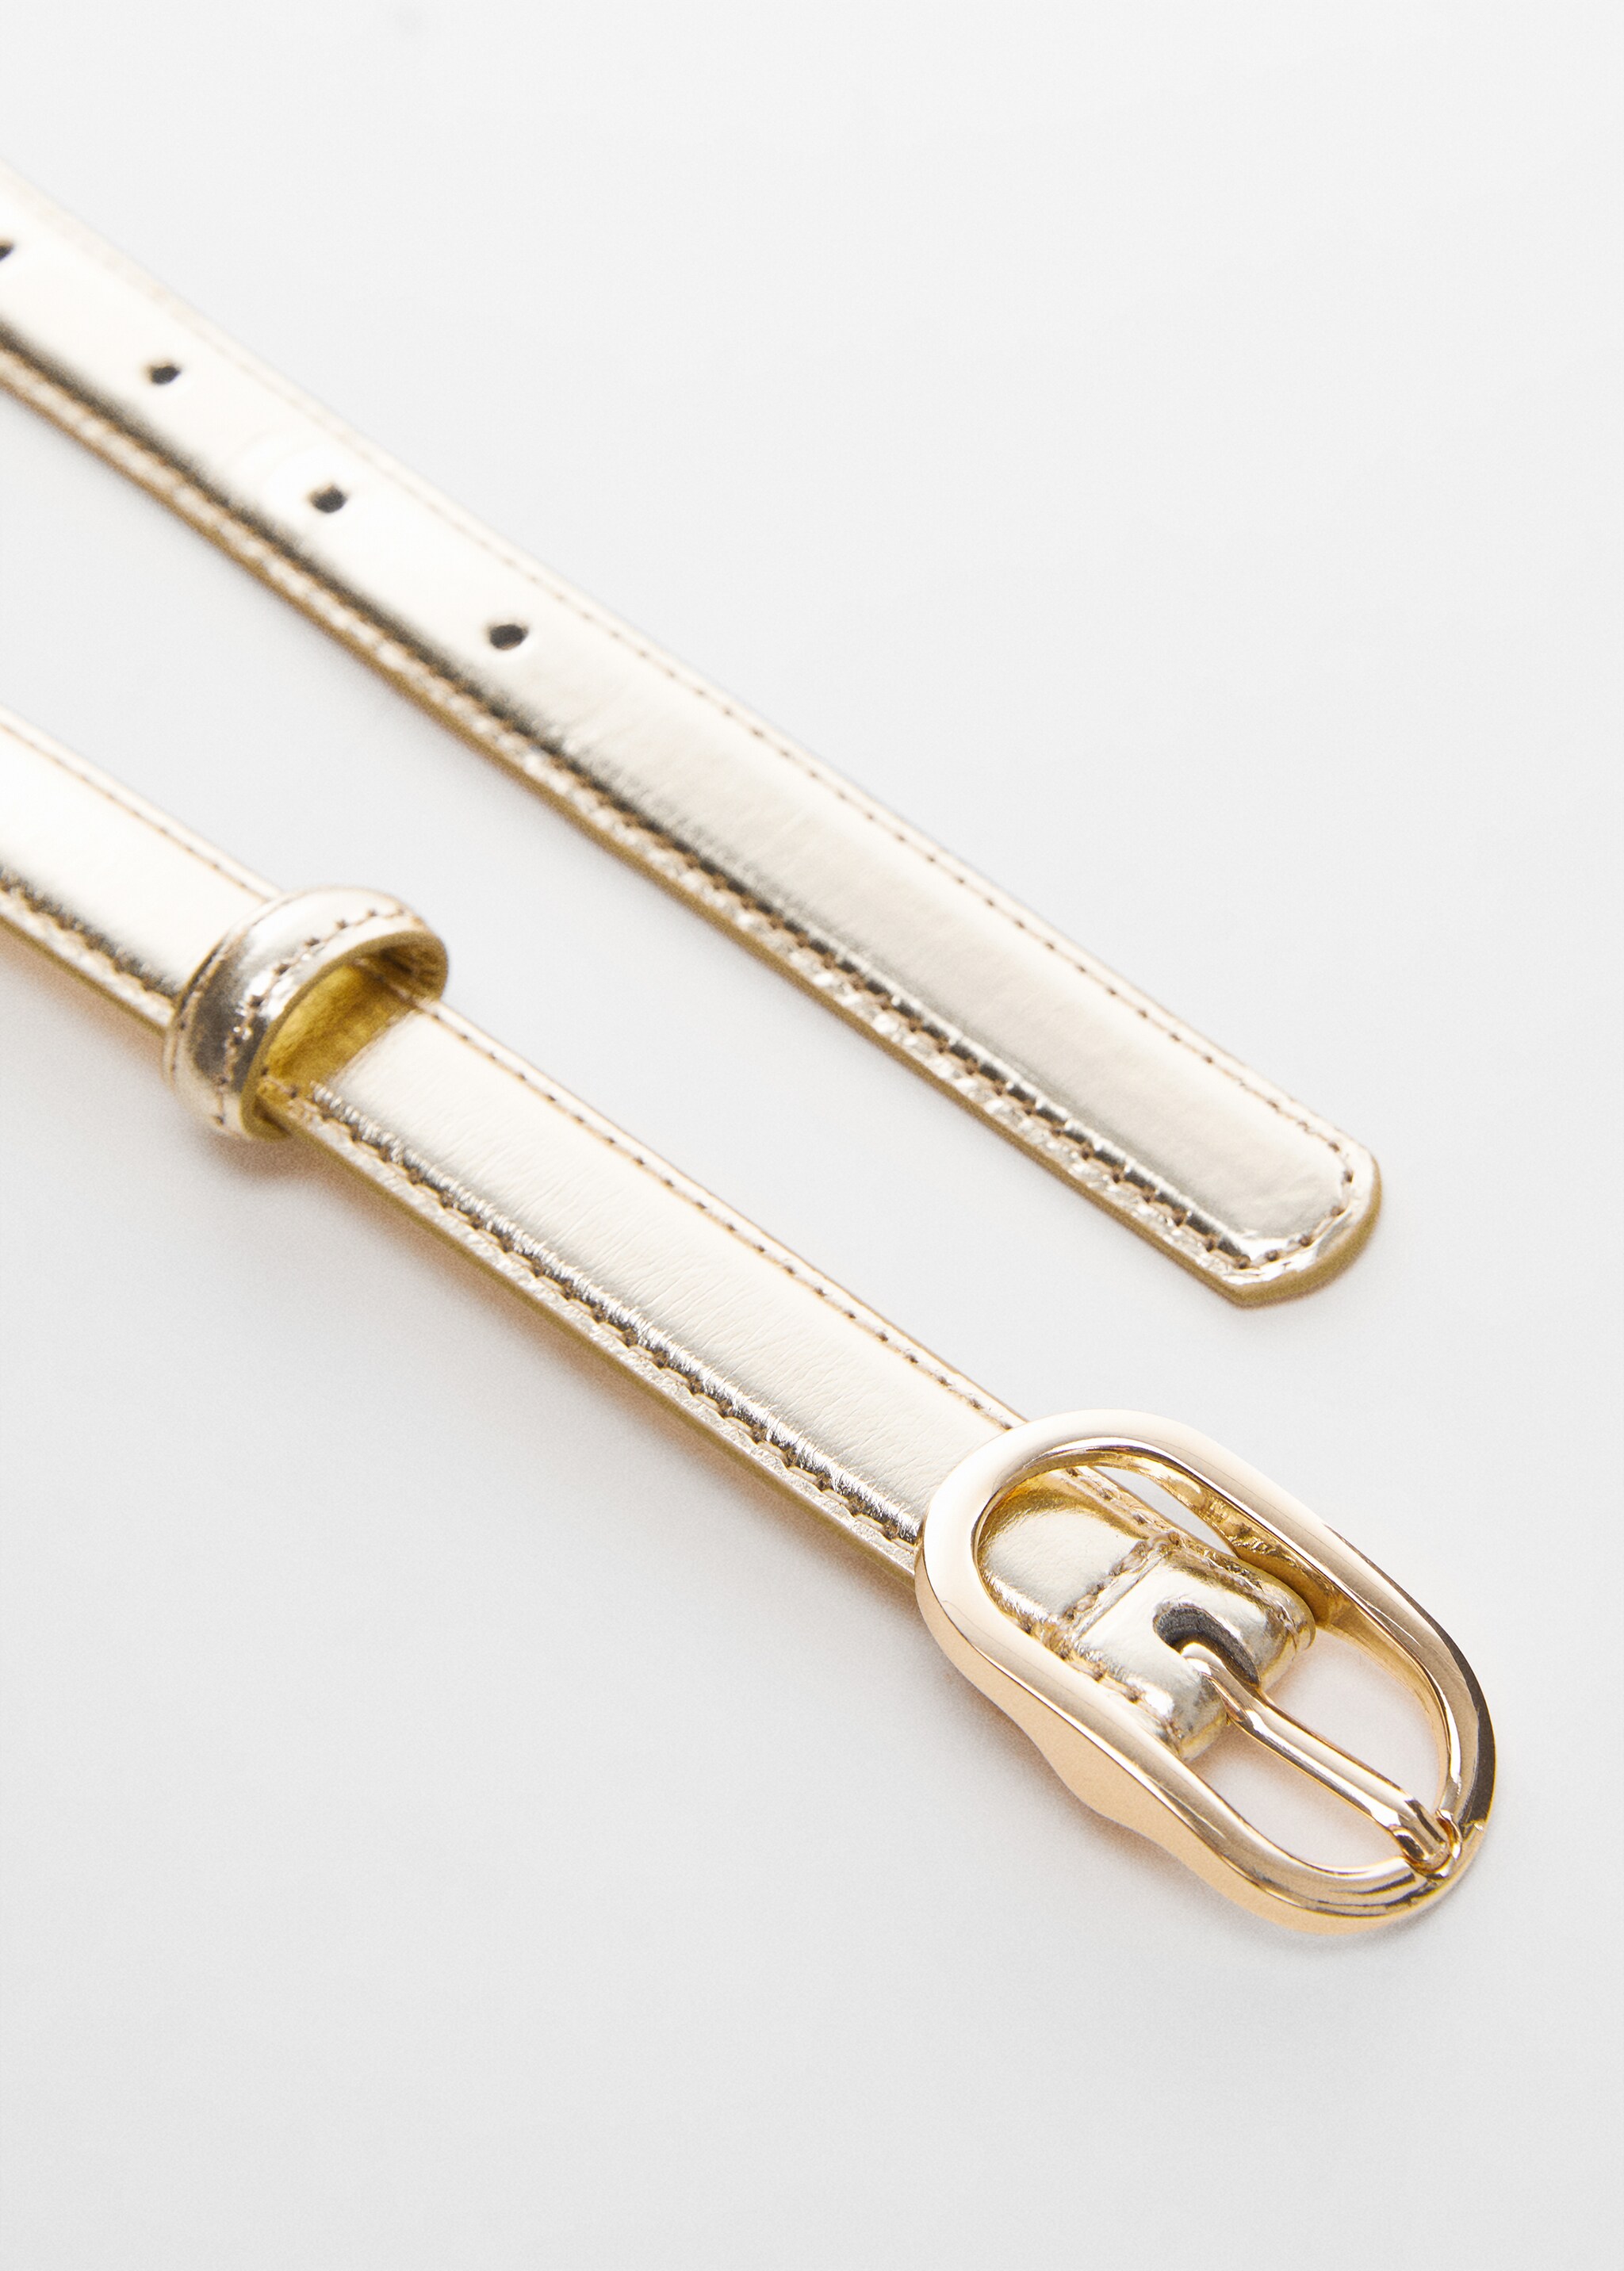 Oval buckle belt - Details of the article 1